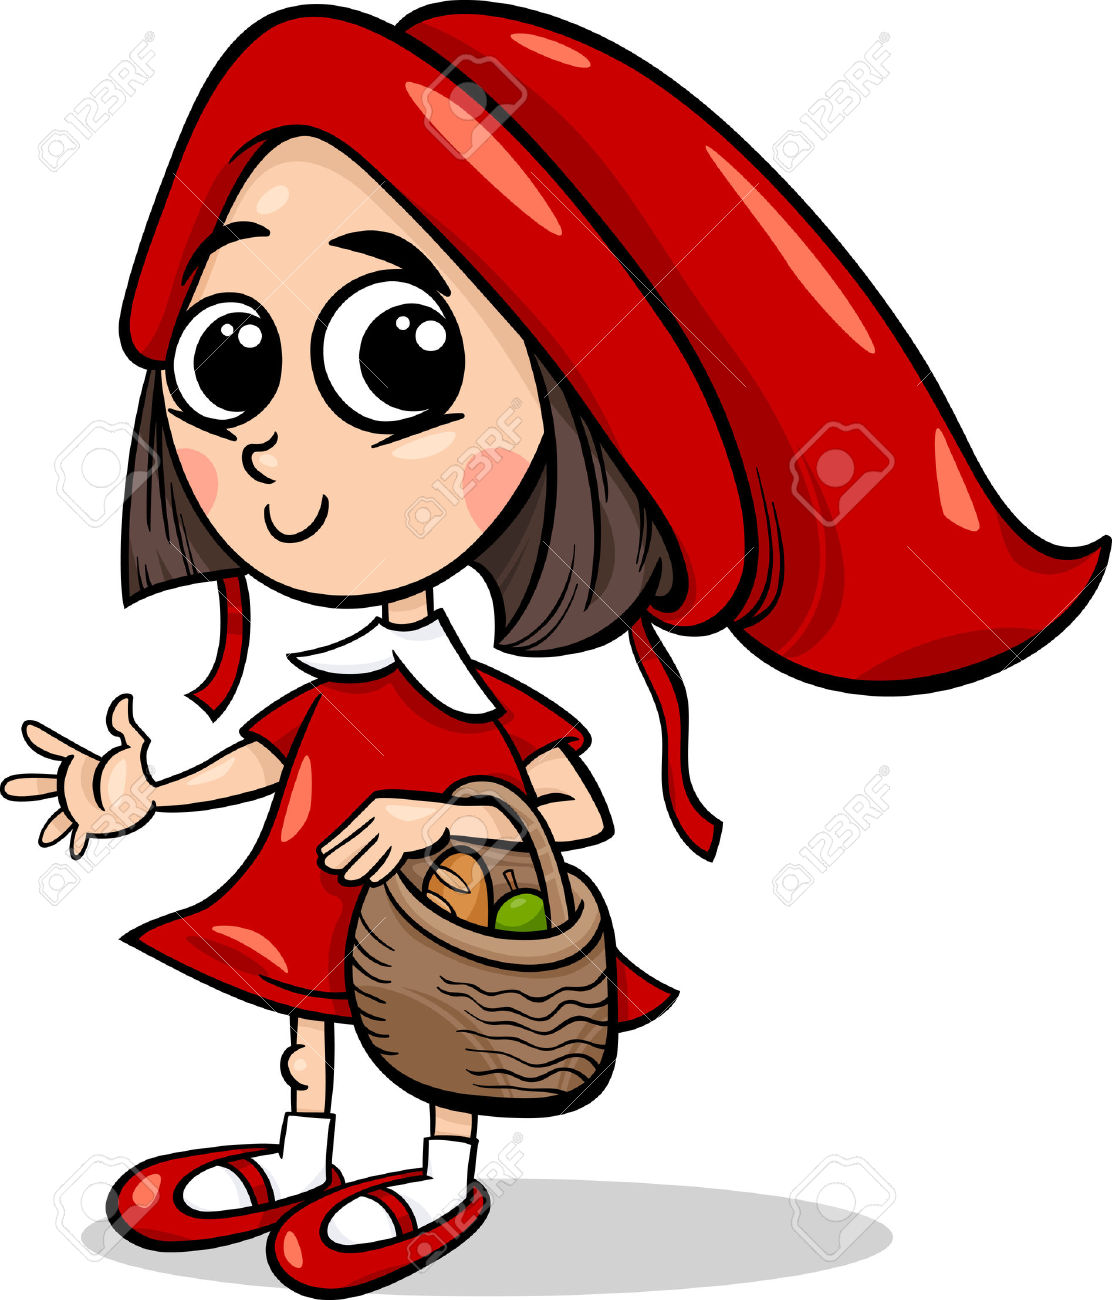 Red Riding Hood Clipart Clipa